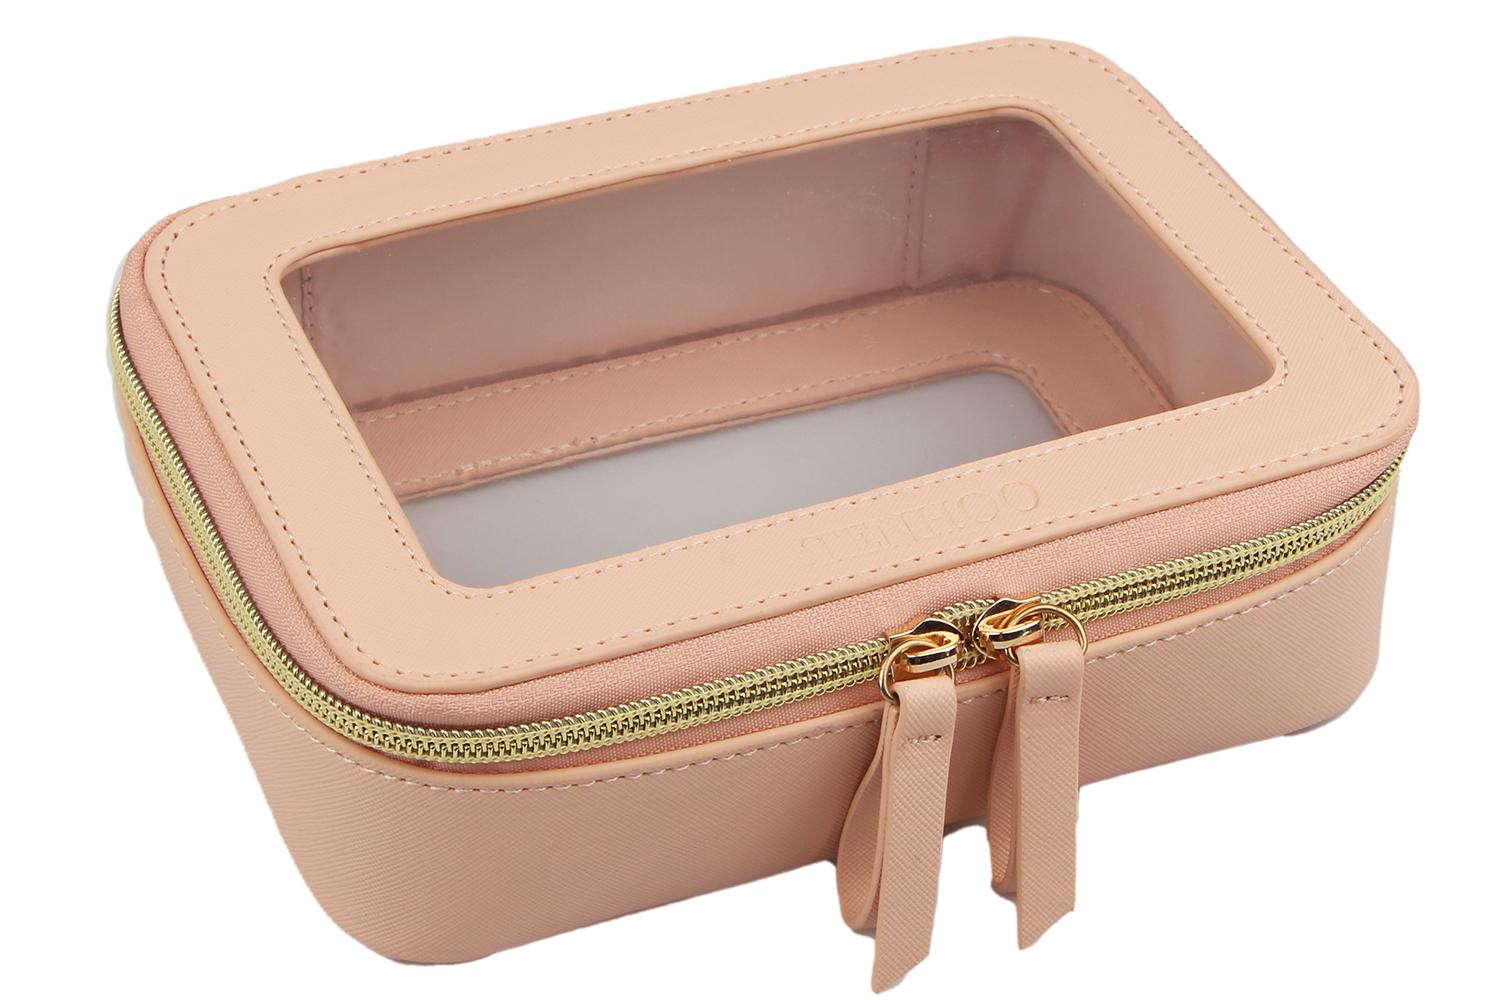 COSMETIC BAG,This bag is a basic cosmetic bag like a box . It can meet your daily matching needs,you can carry it in your travel case or travel bag. It can be used  for daily travel storage,packing...